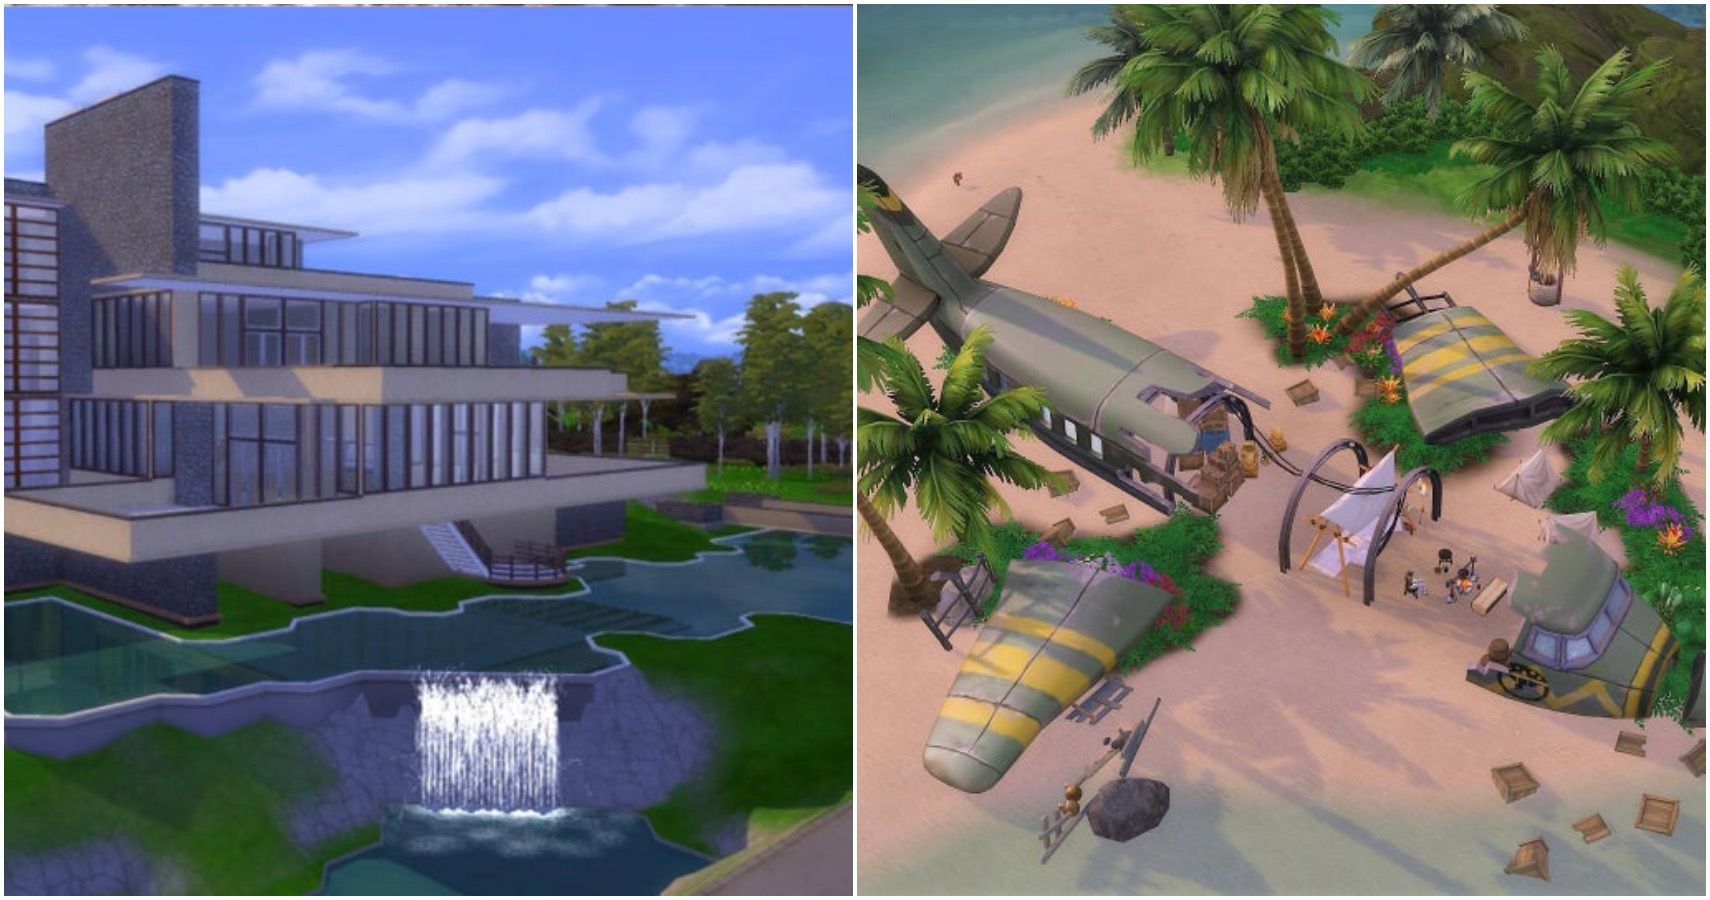 A recreation of Falling Water and a crashed plane site